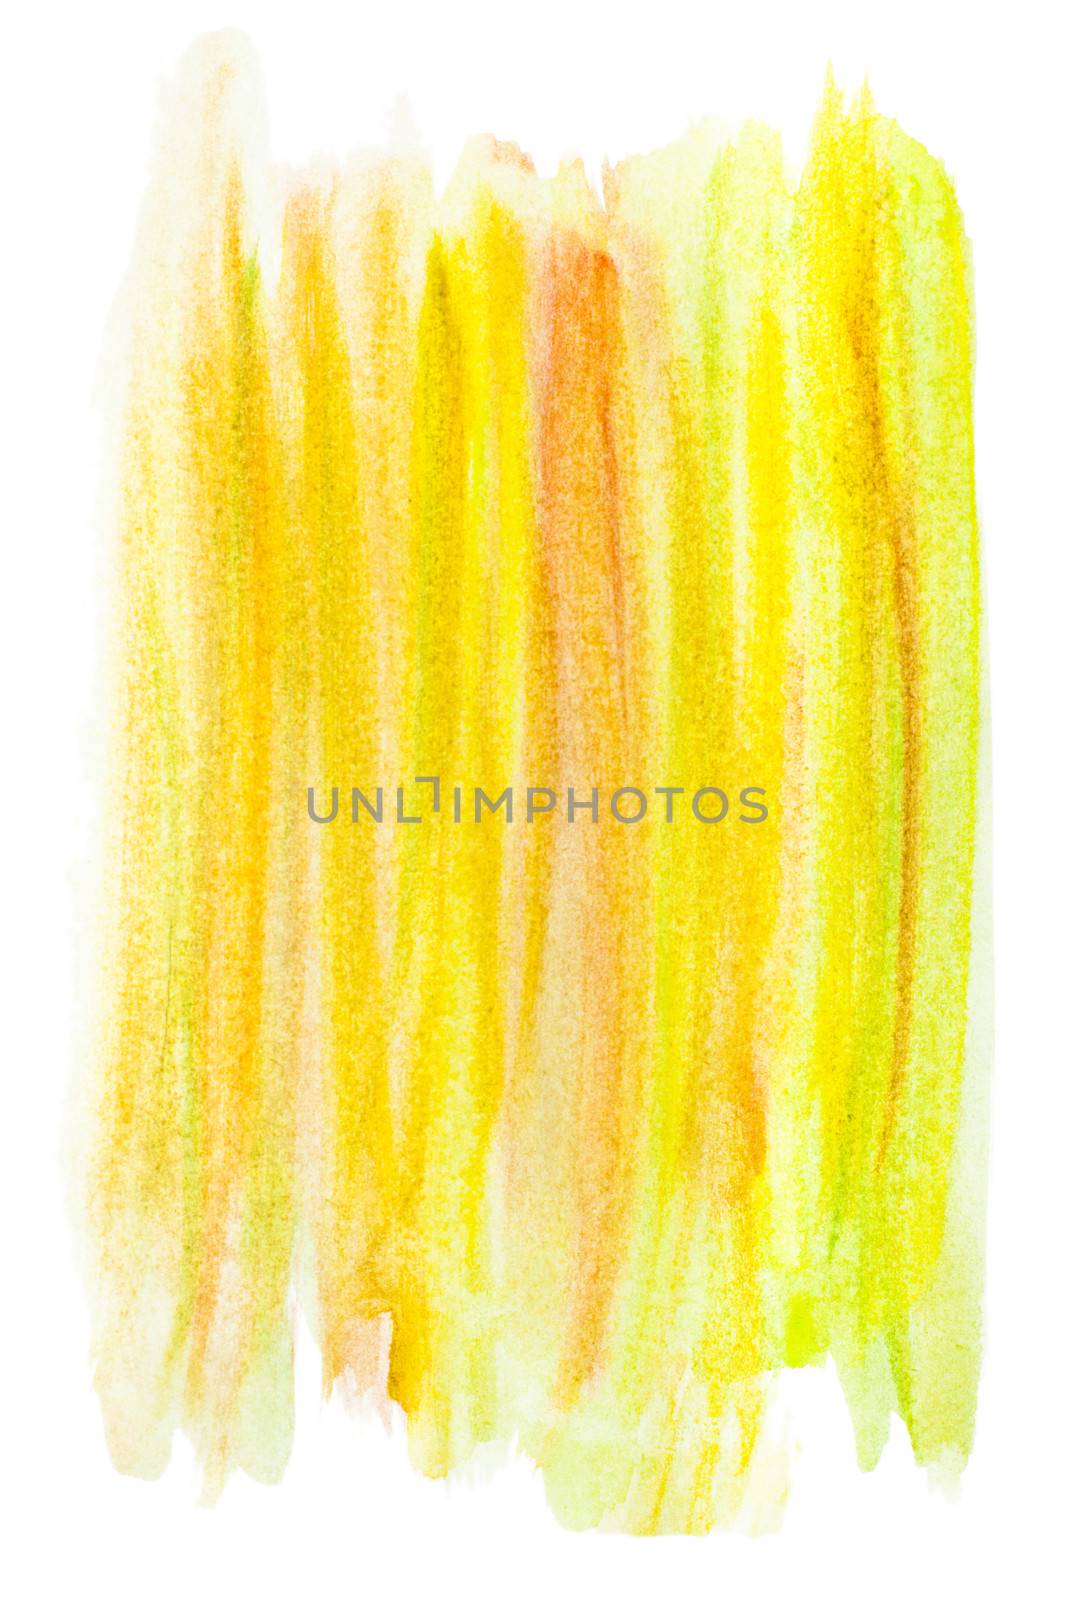 Abstract yellow watercolor background. by anelina